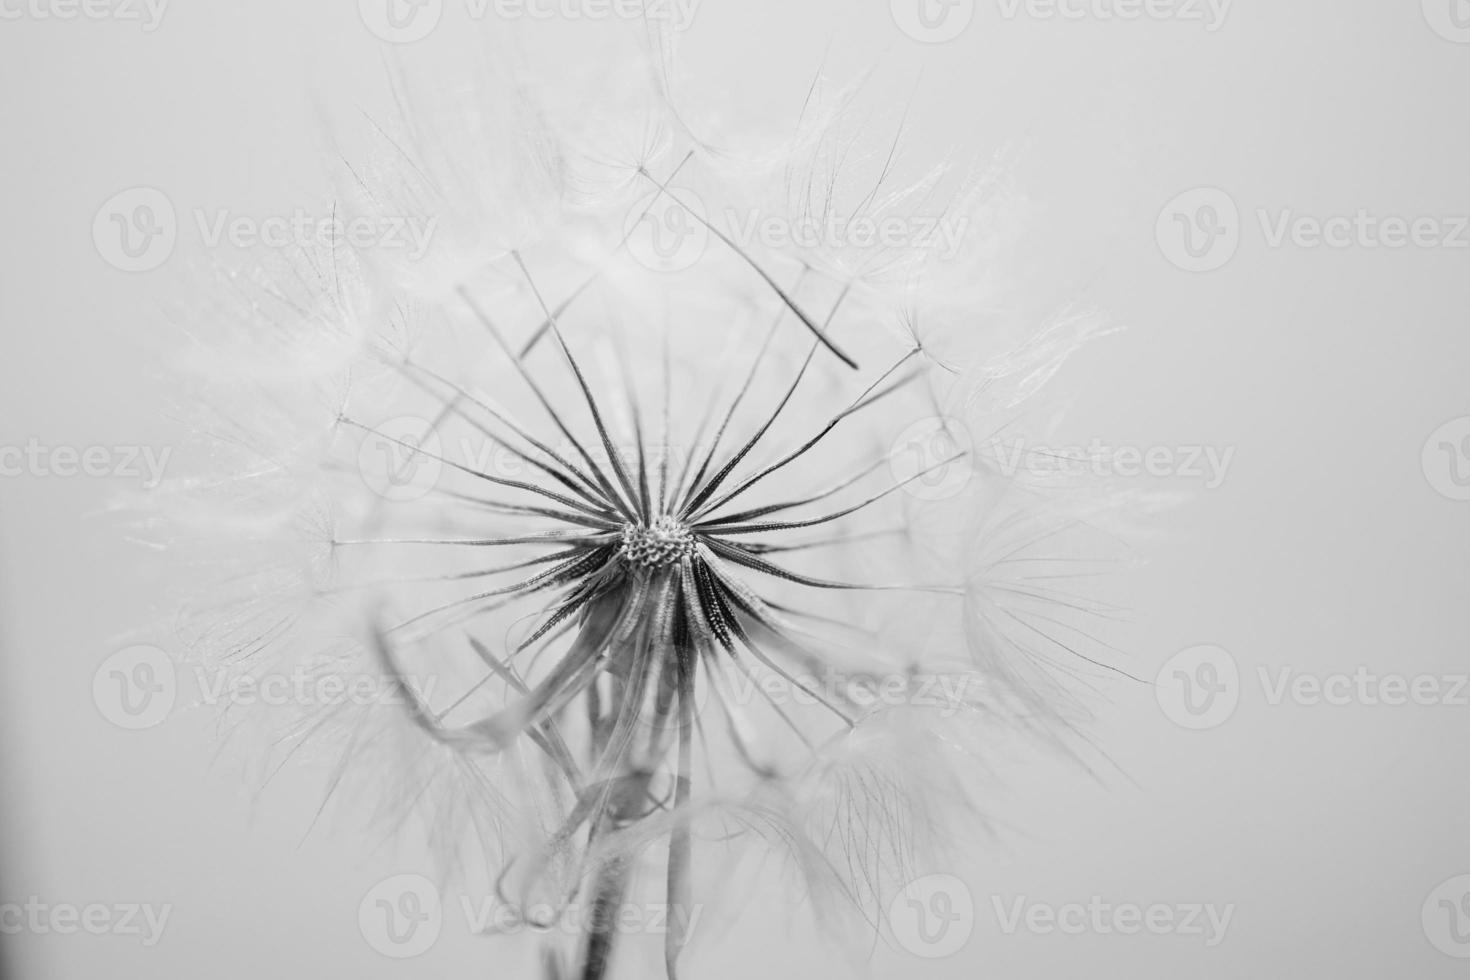 summer dandelion in close-up on a light background photo